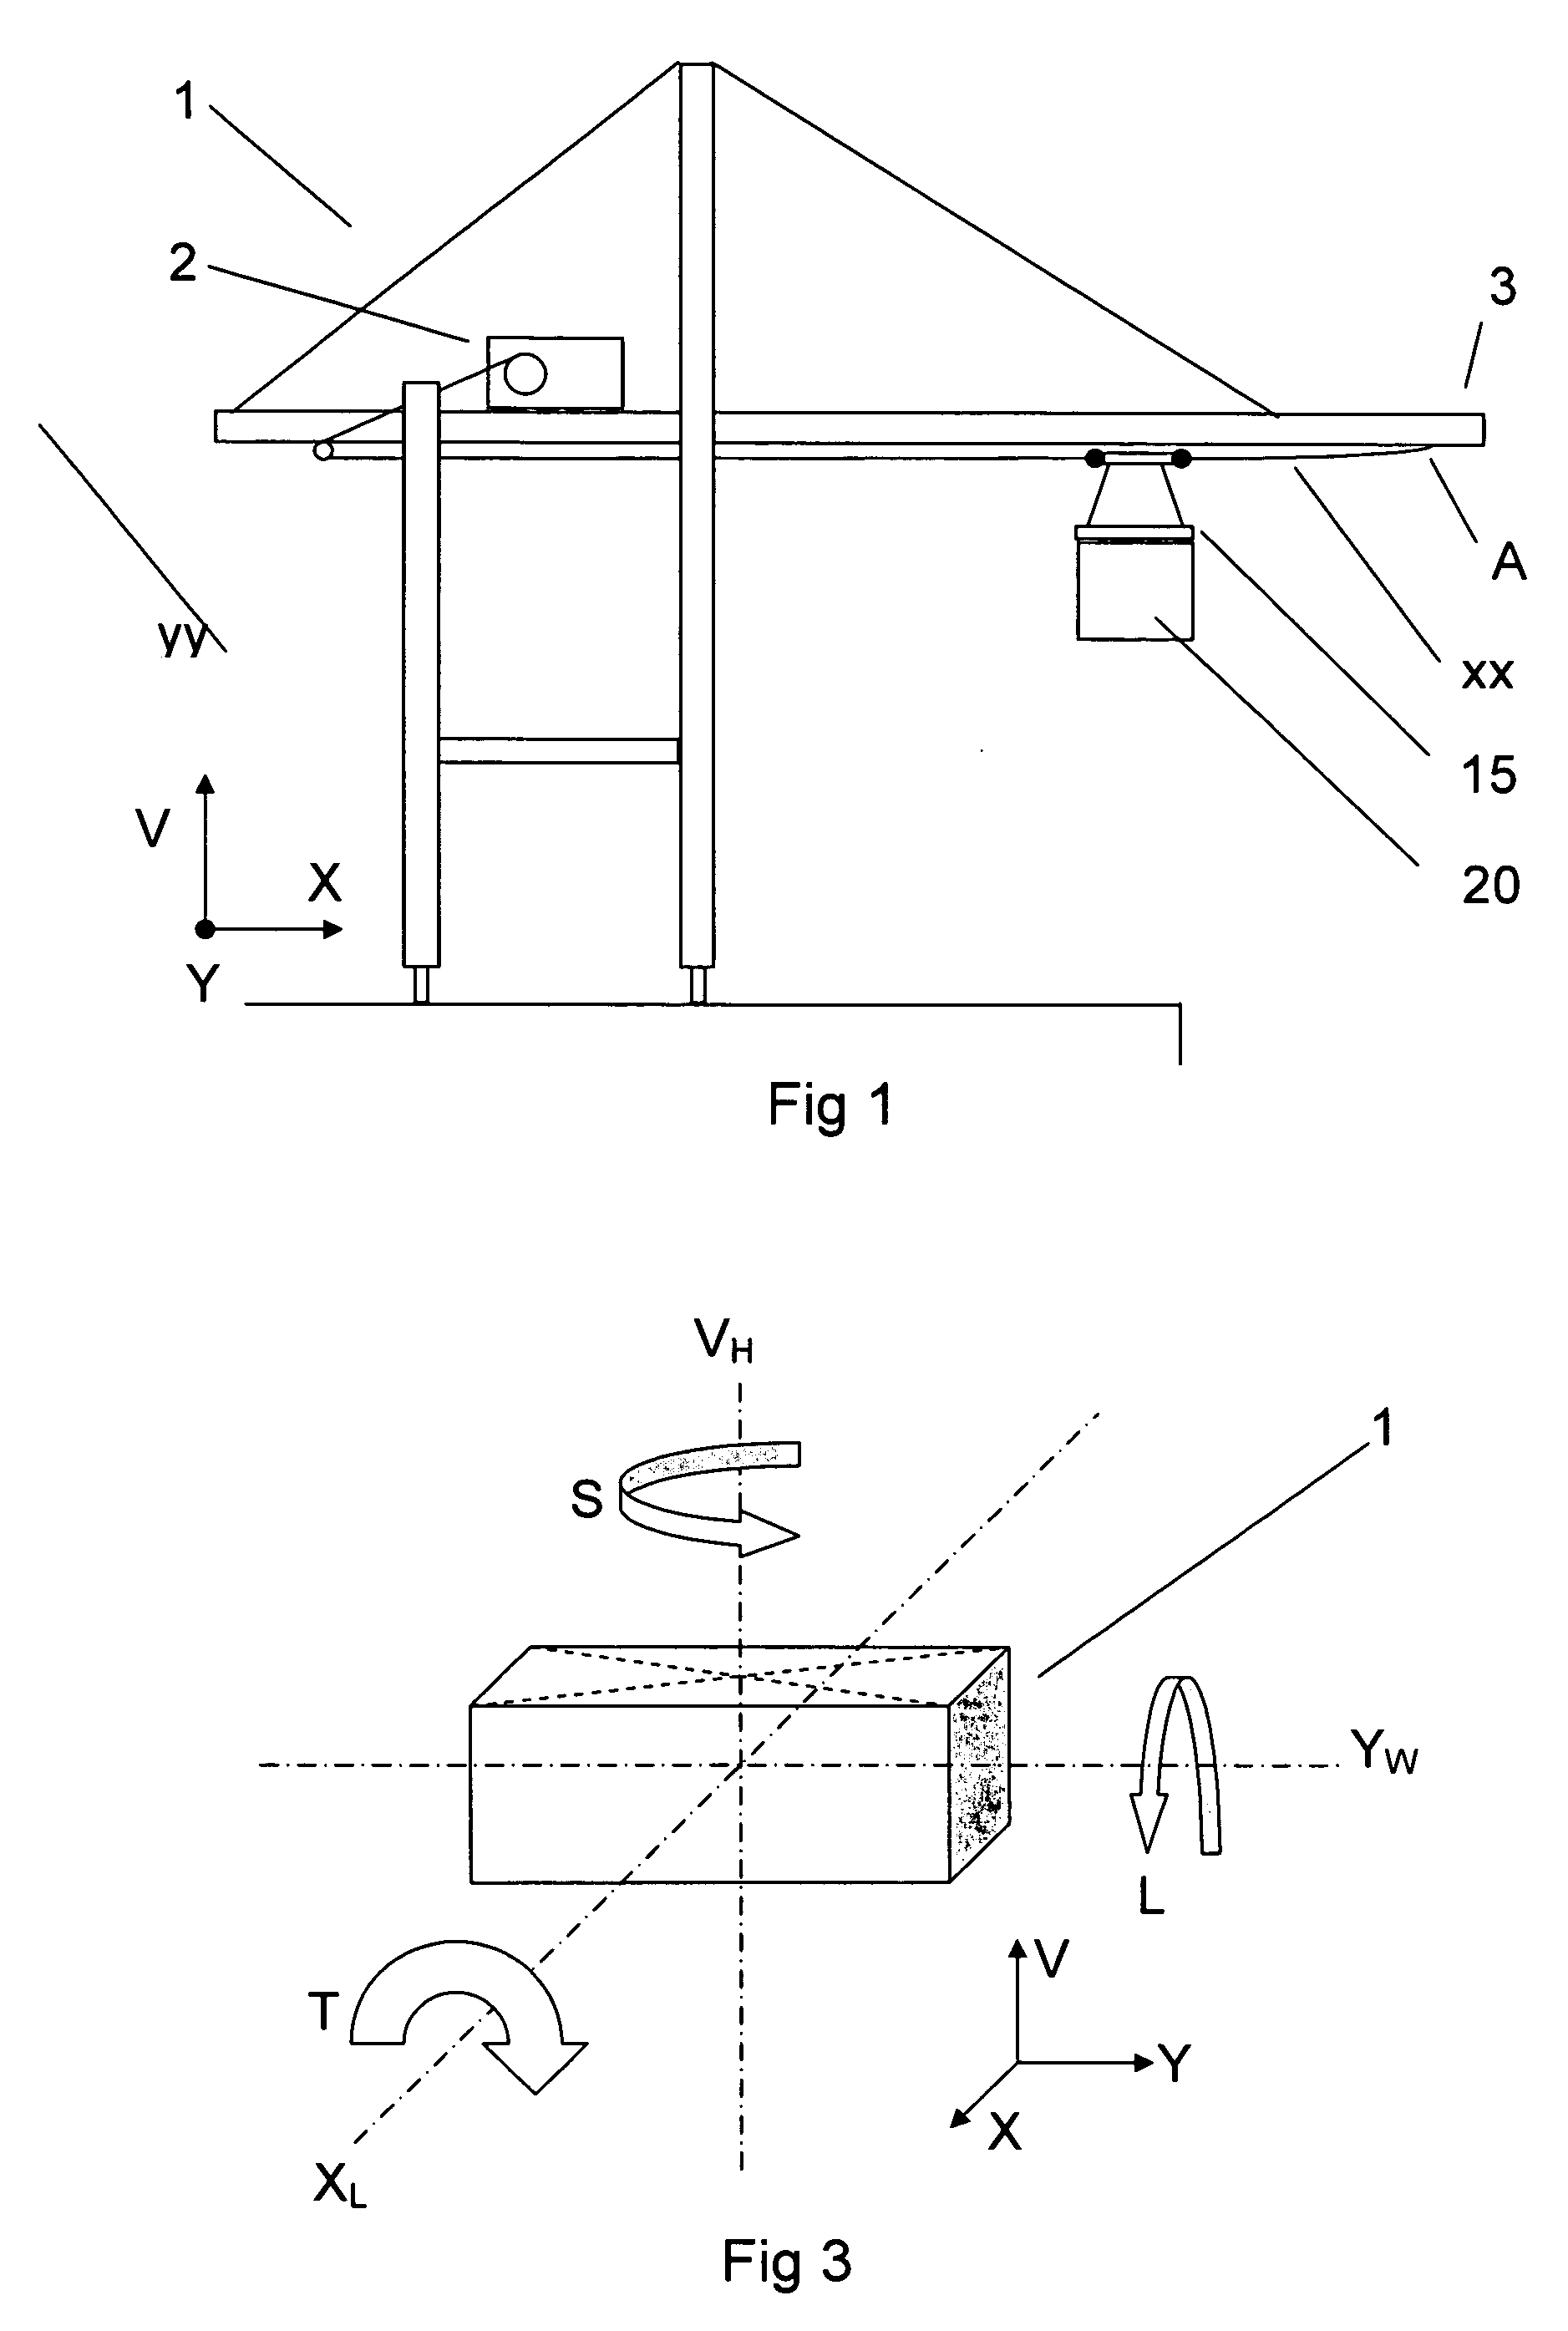 Load control device for a crane